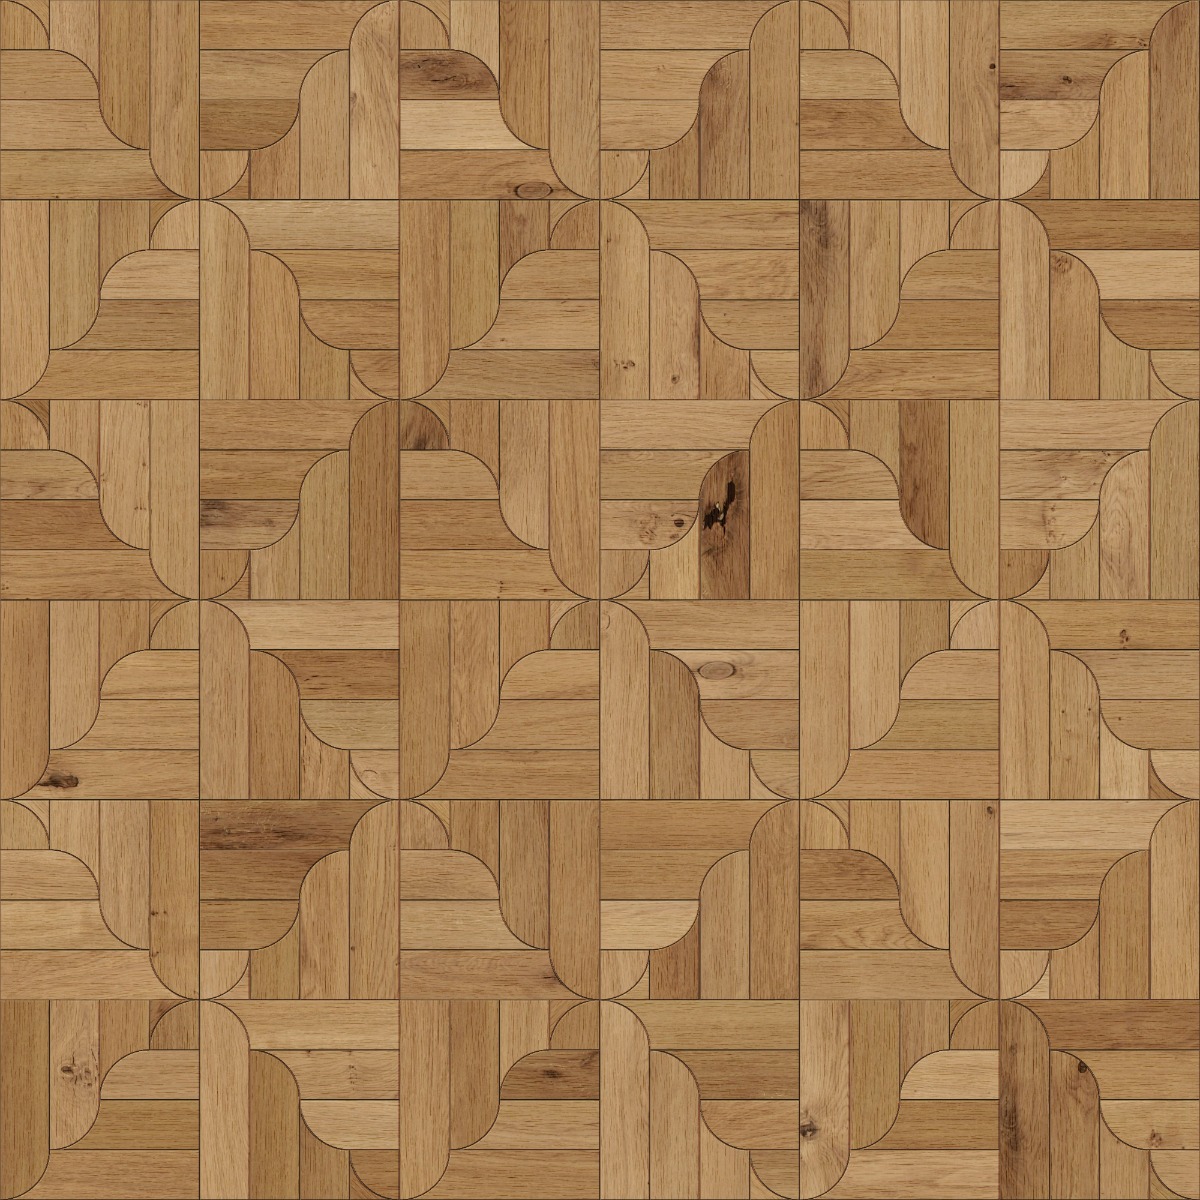 A seamless wood texture with oak boards arranged in a Cloud Weave pattern